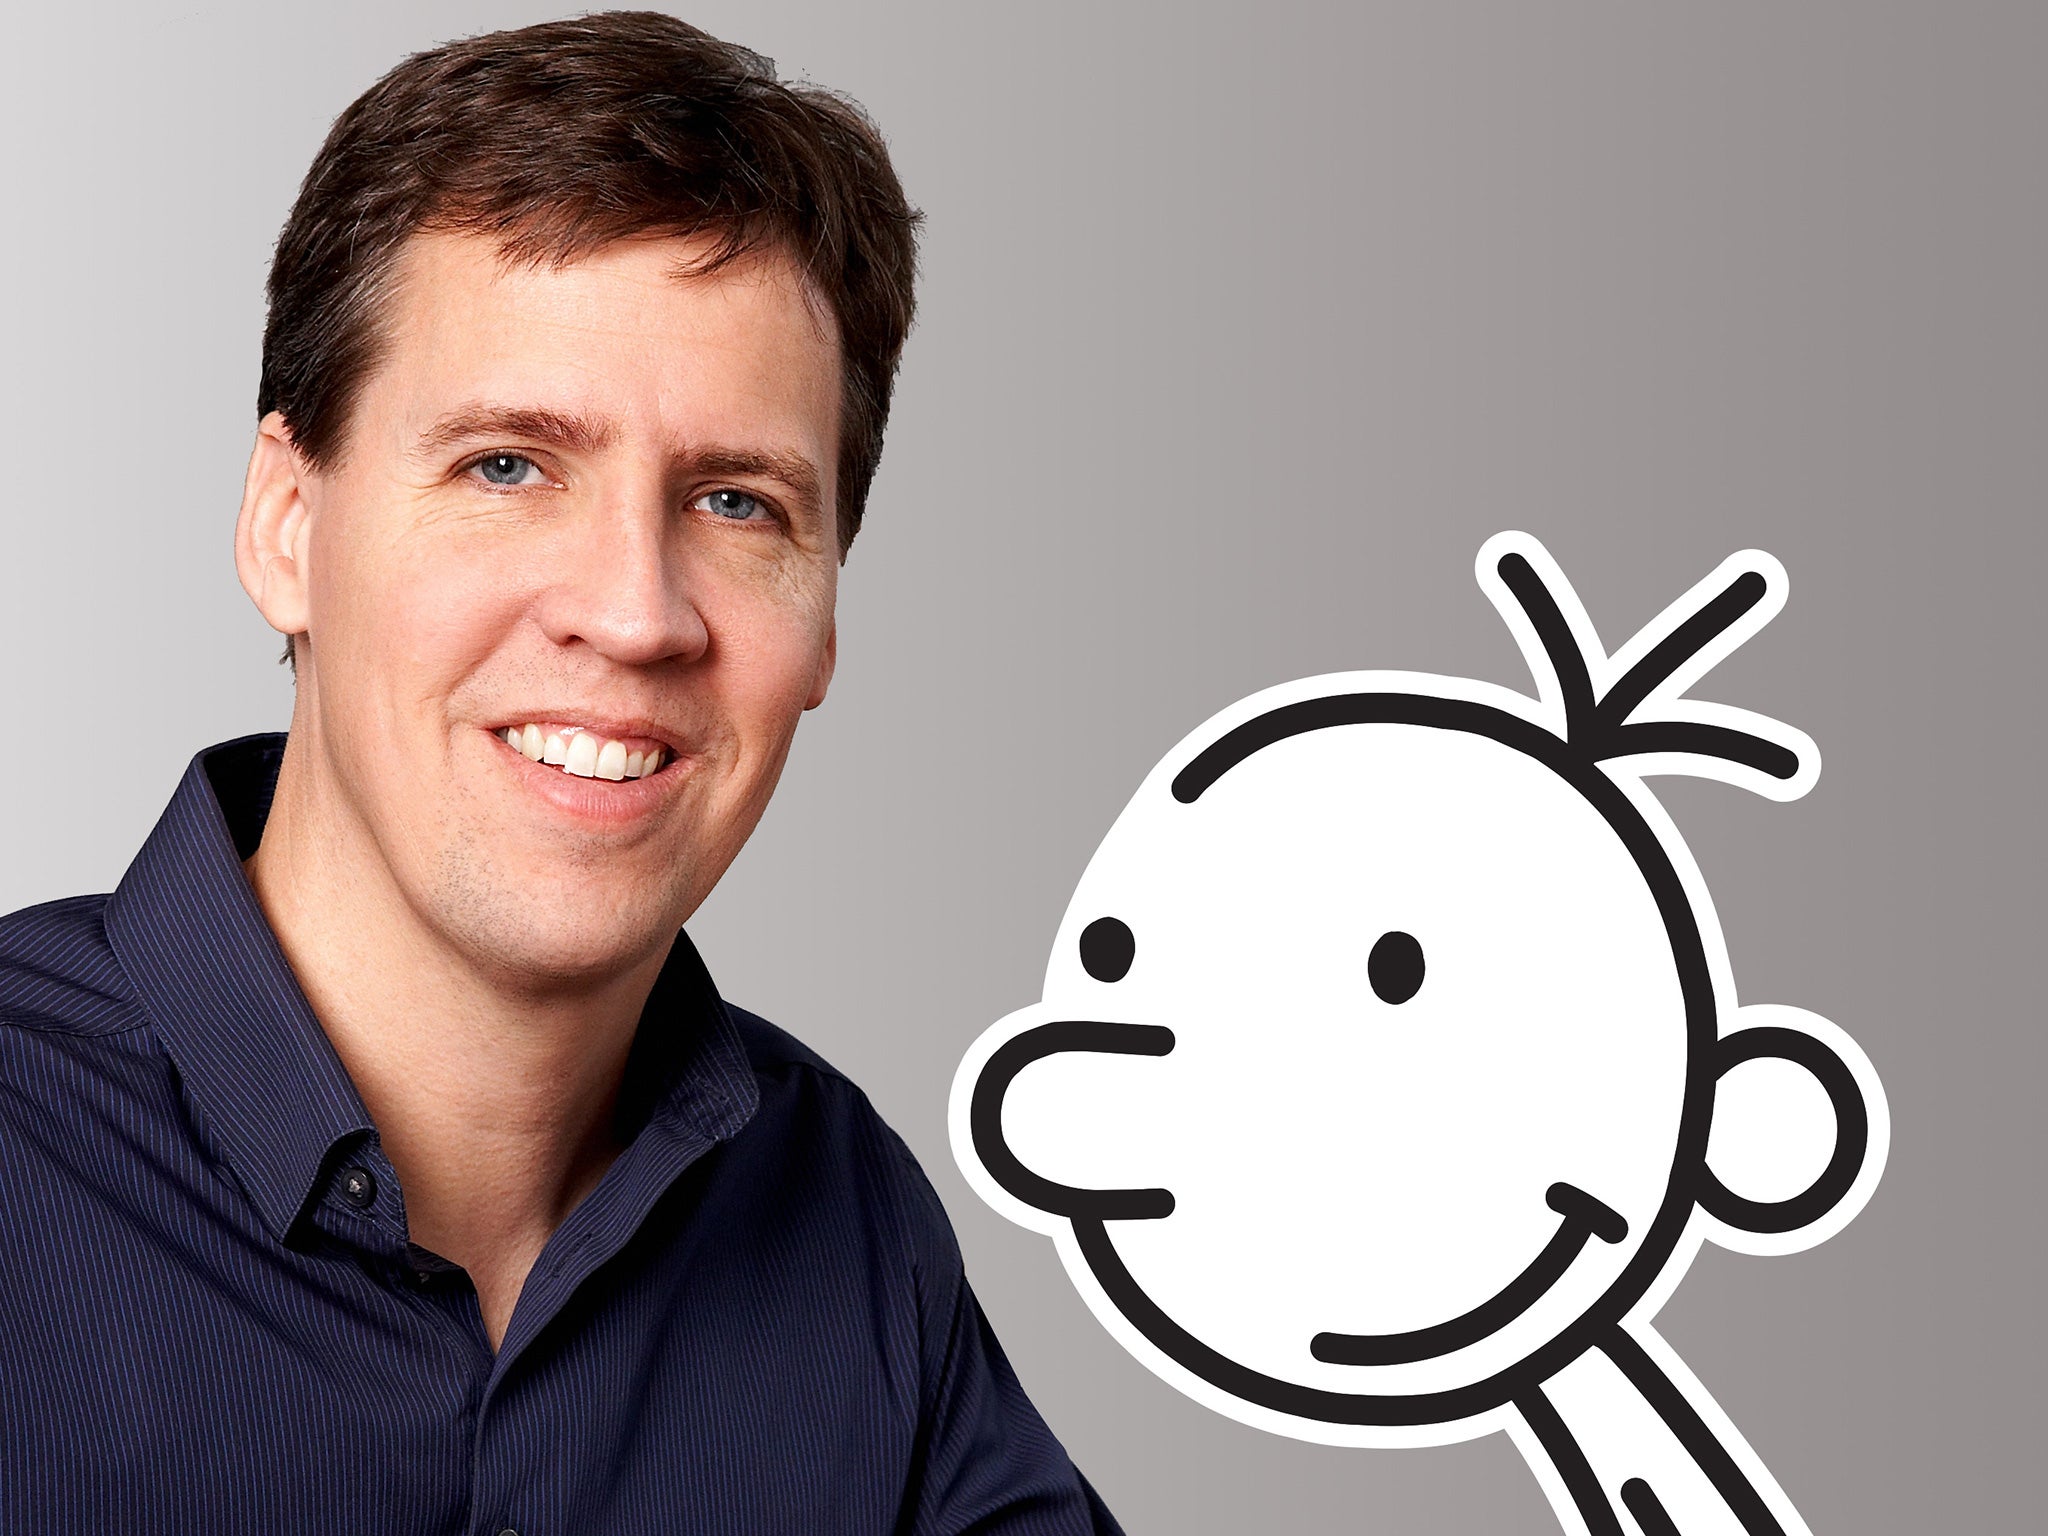 Bring out the wimp: Jeff Kinney with Greg